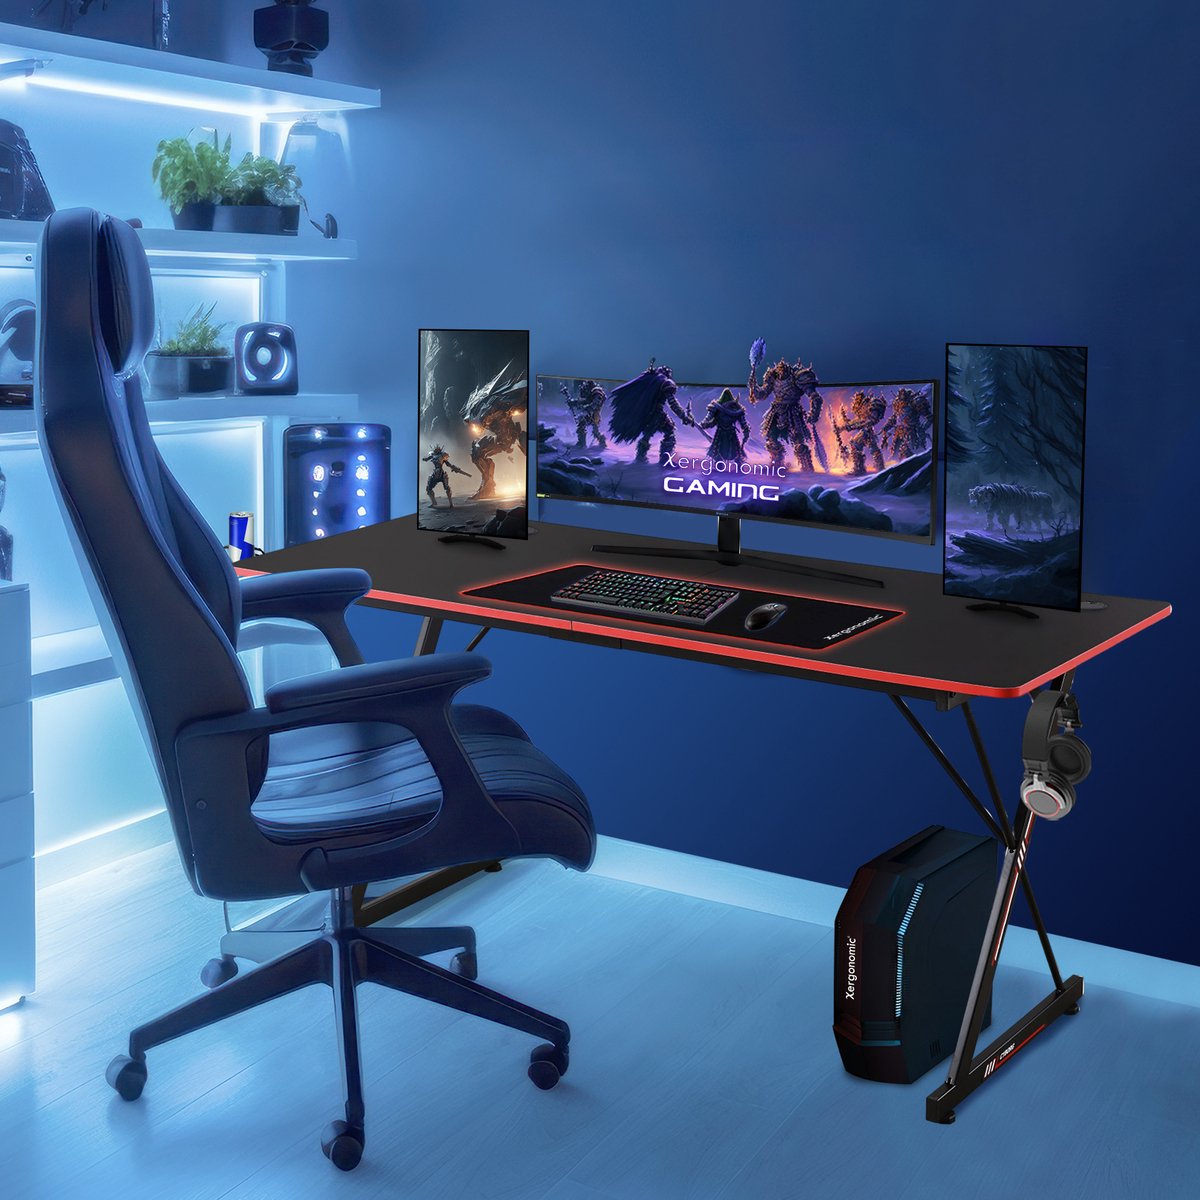 Xergonomic Aion Cyborg Gaming desk - Headphone holder, cup holder & Cable organizer - Carbon Fiber Coated Top Layer - Adjustable legs - D60xW160xH75 cm - Black/Red